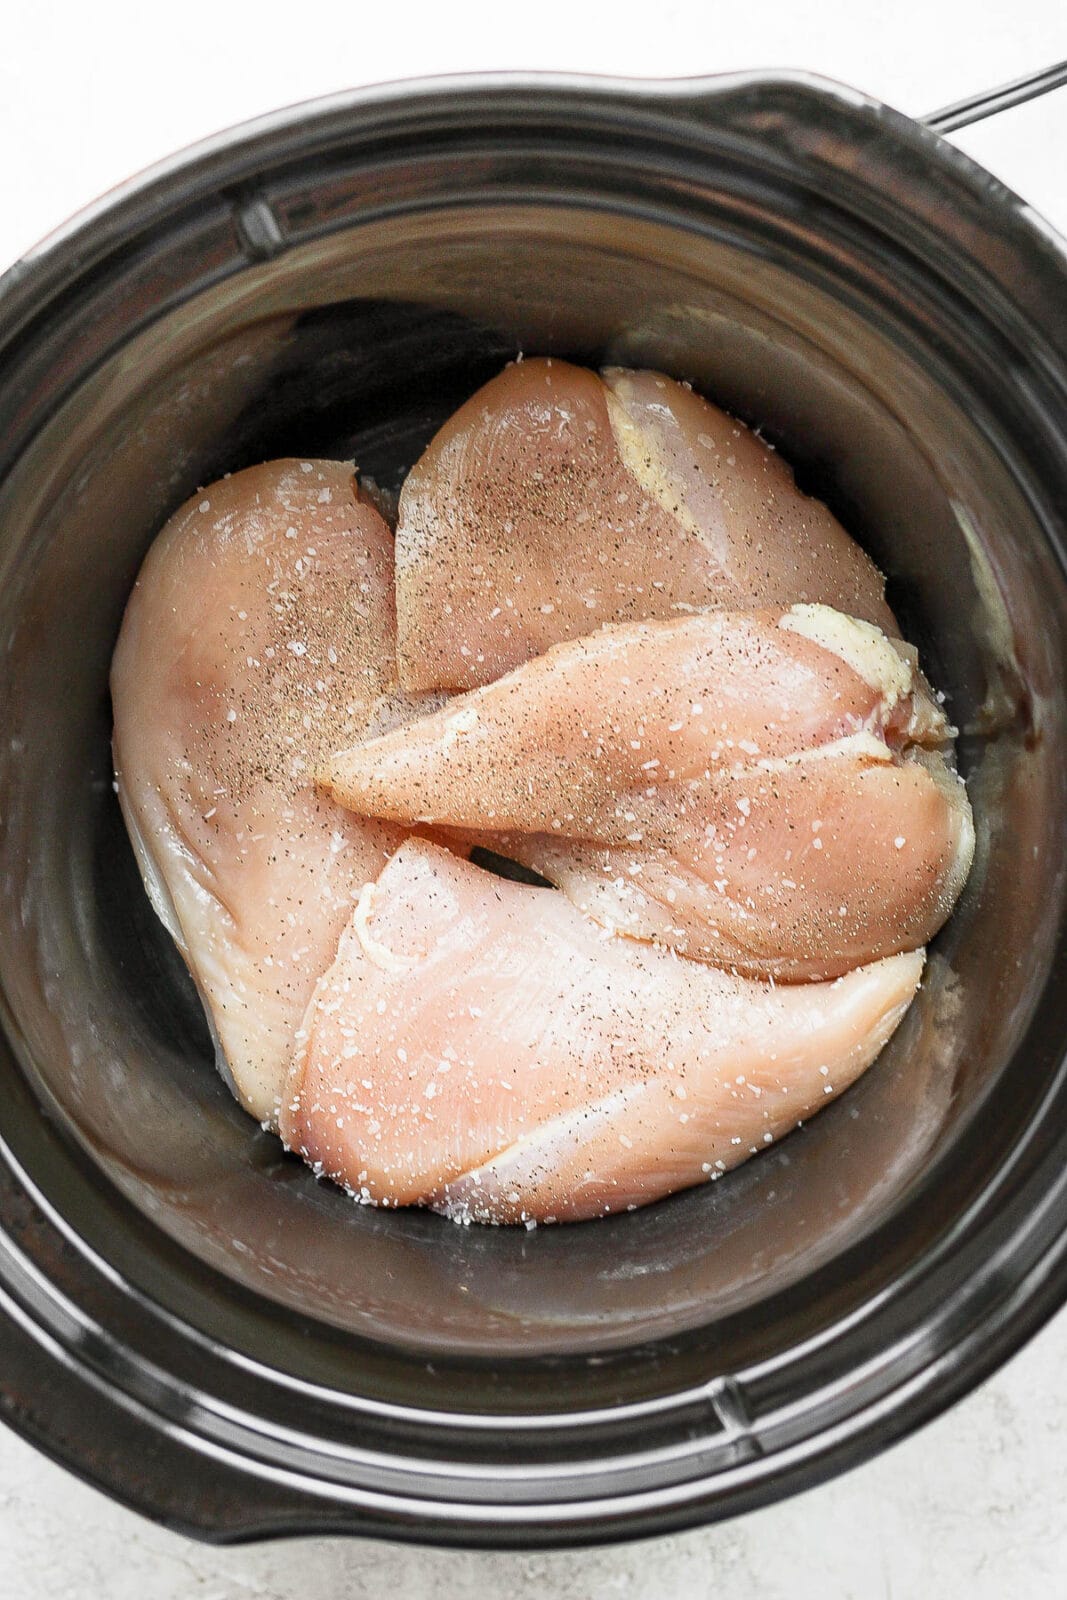 Slow cooker with raw chicken breasts, salt, and pepper.